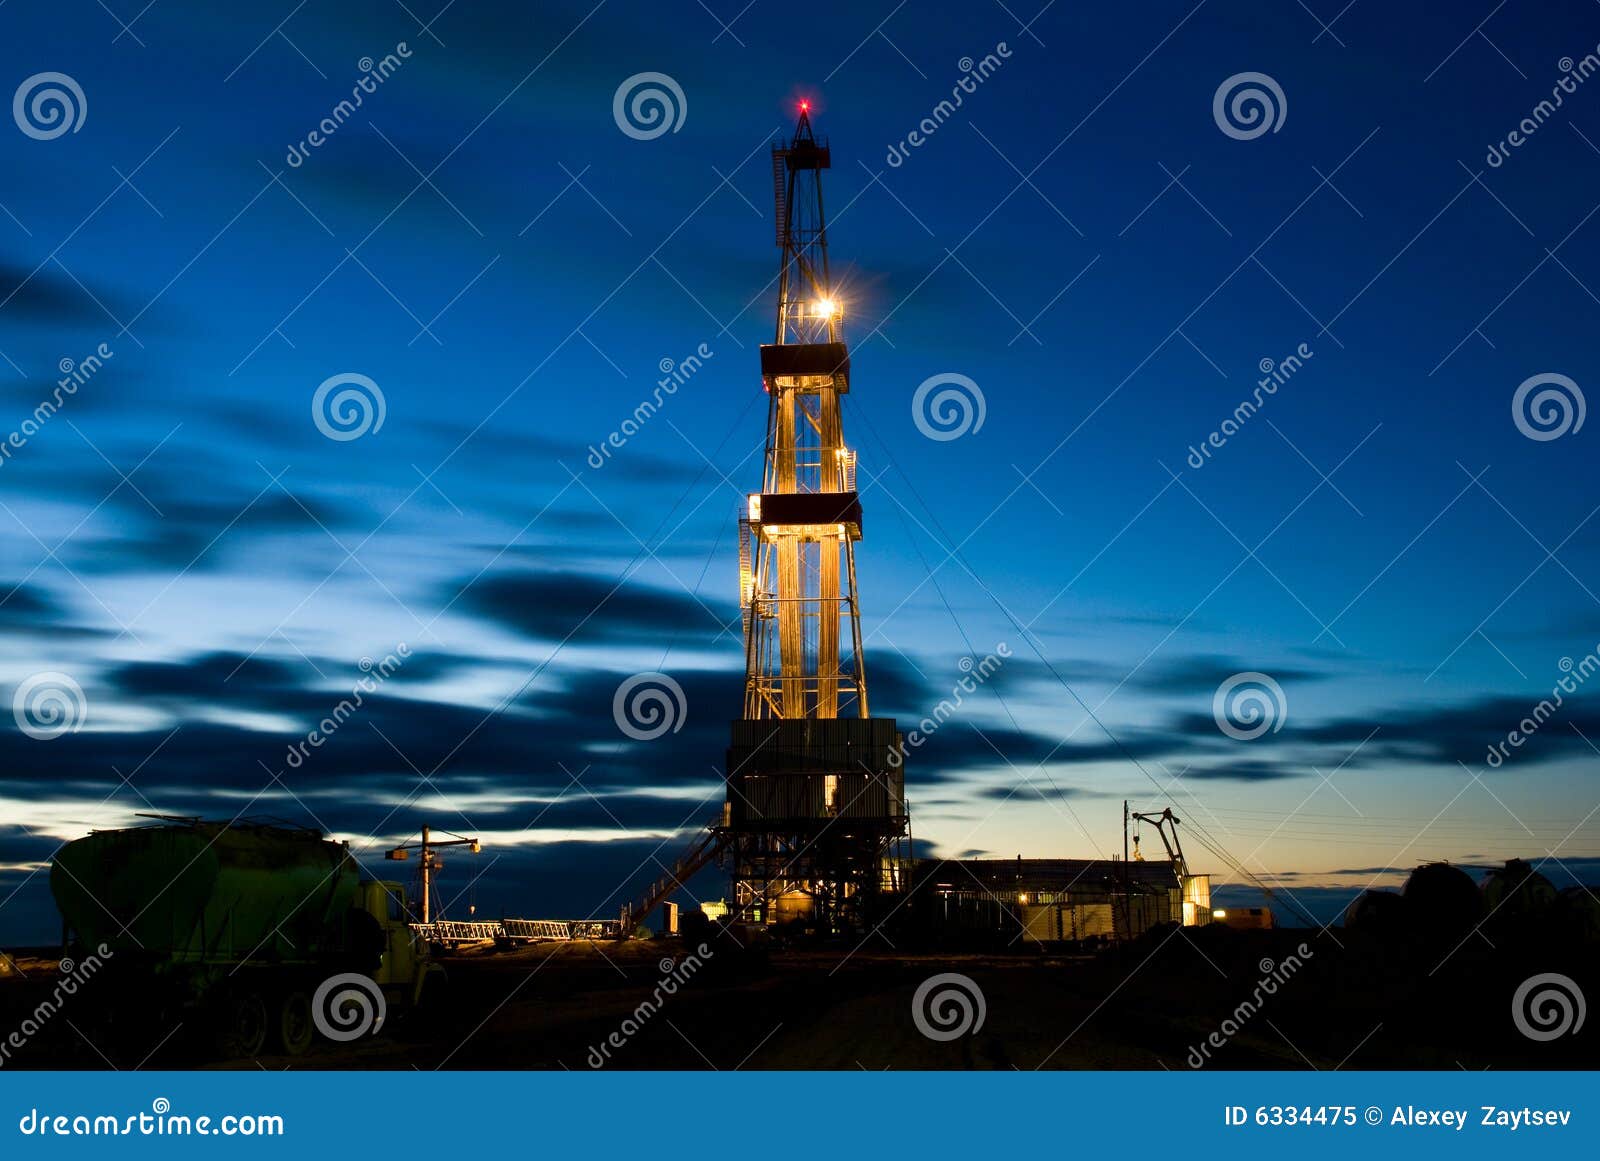 drilling rig in the night